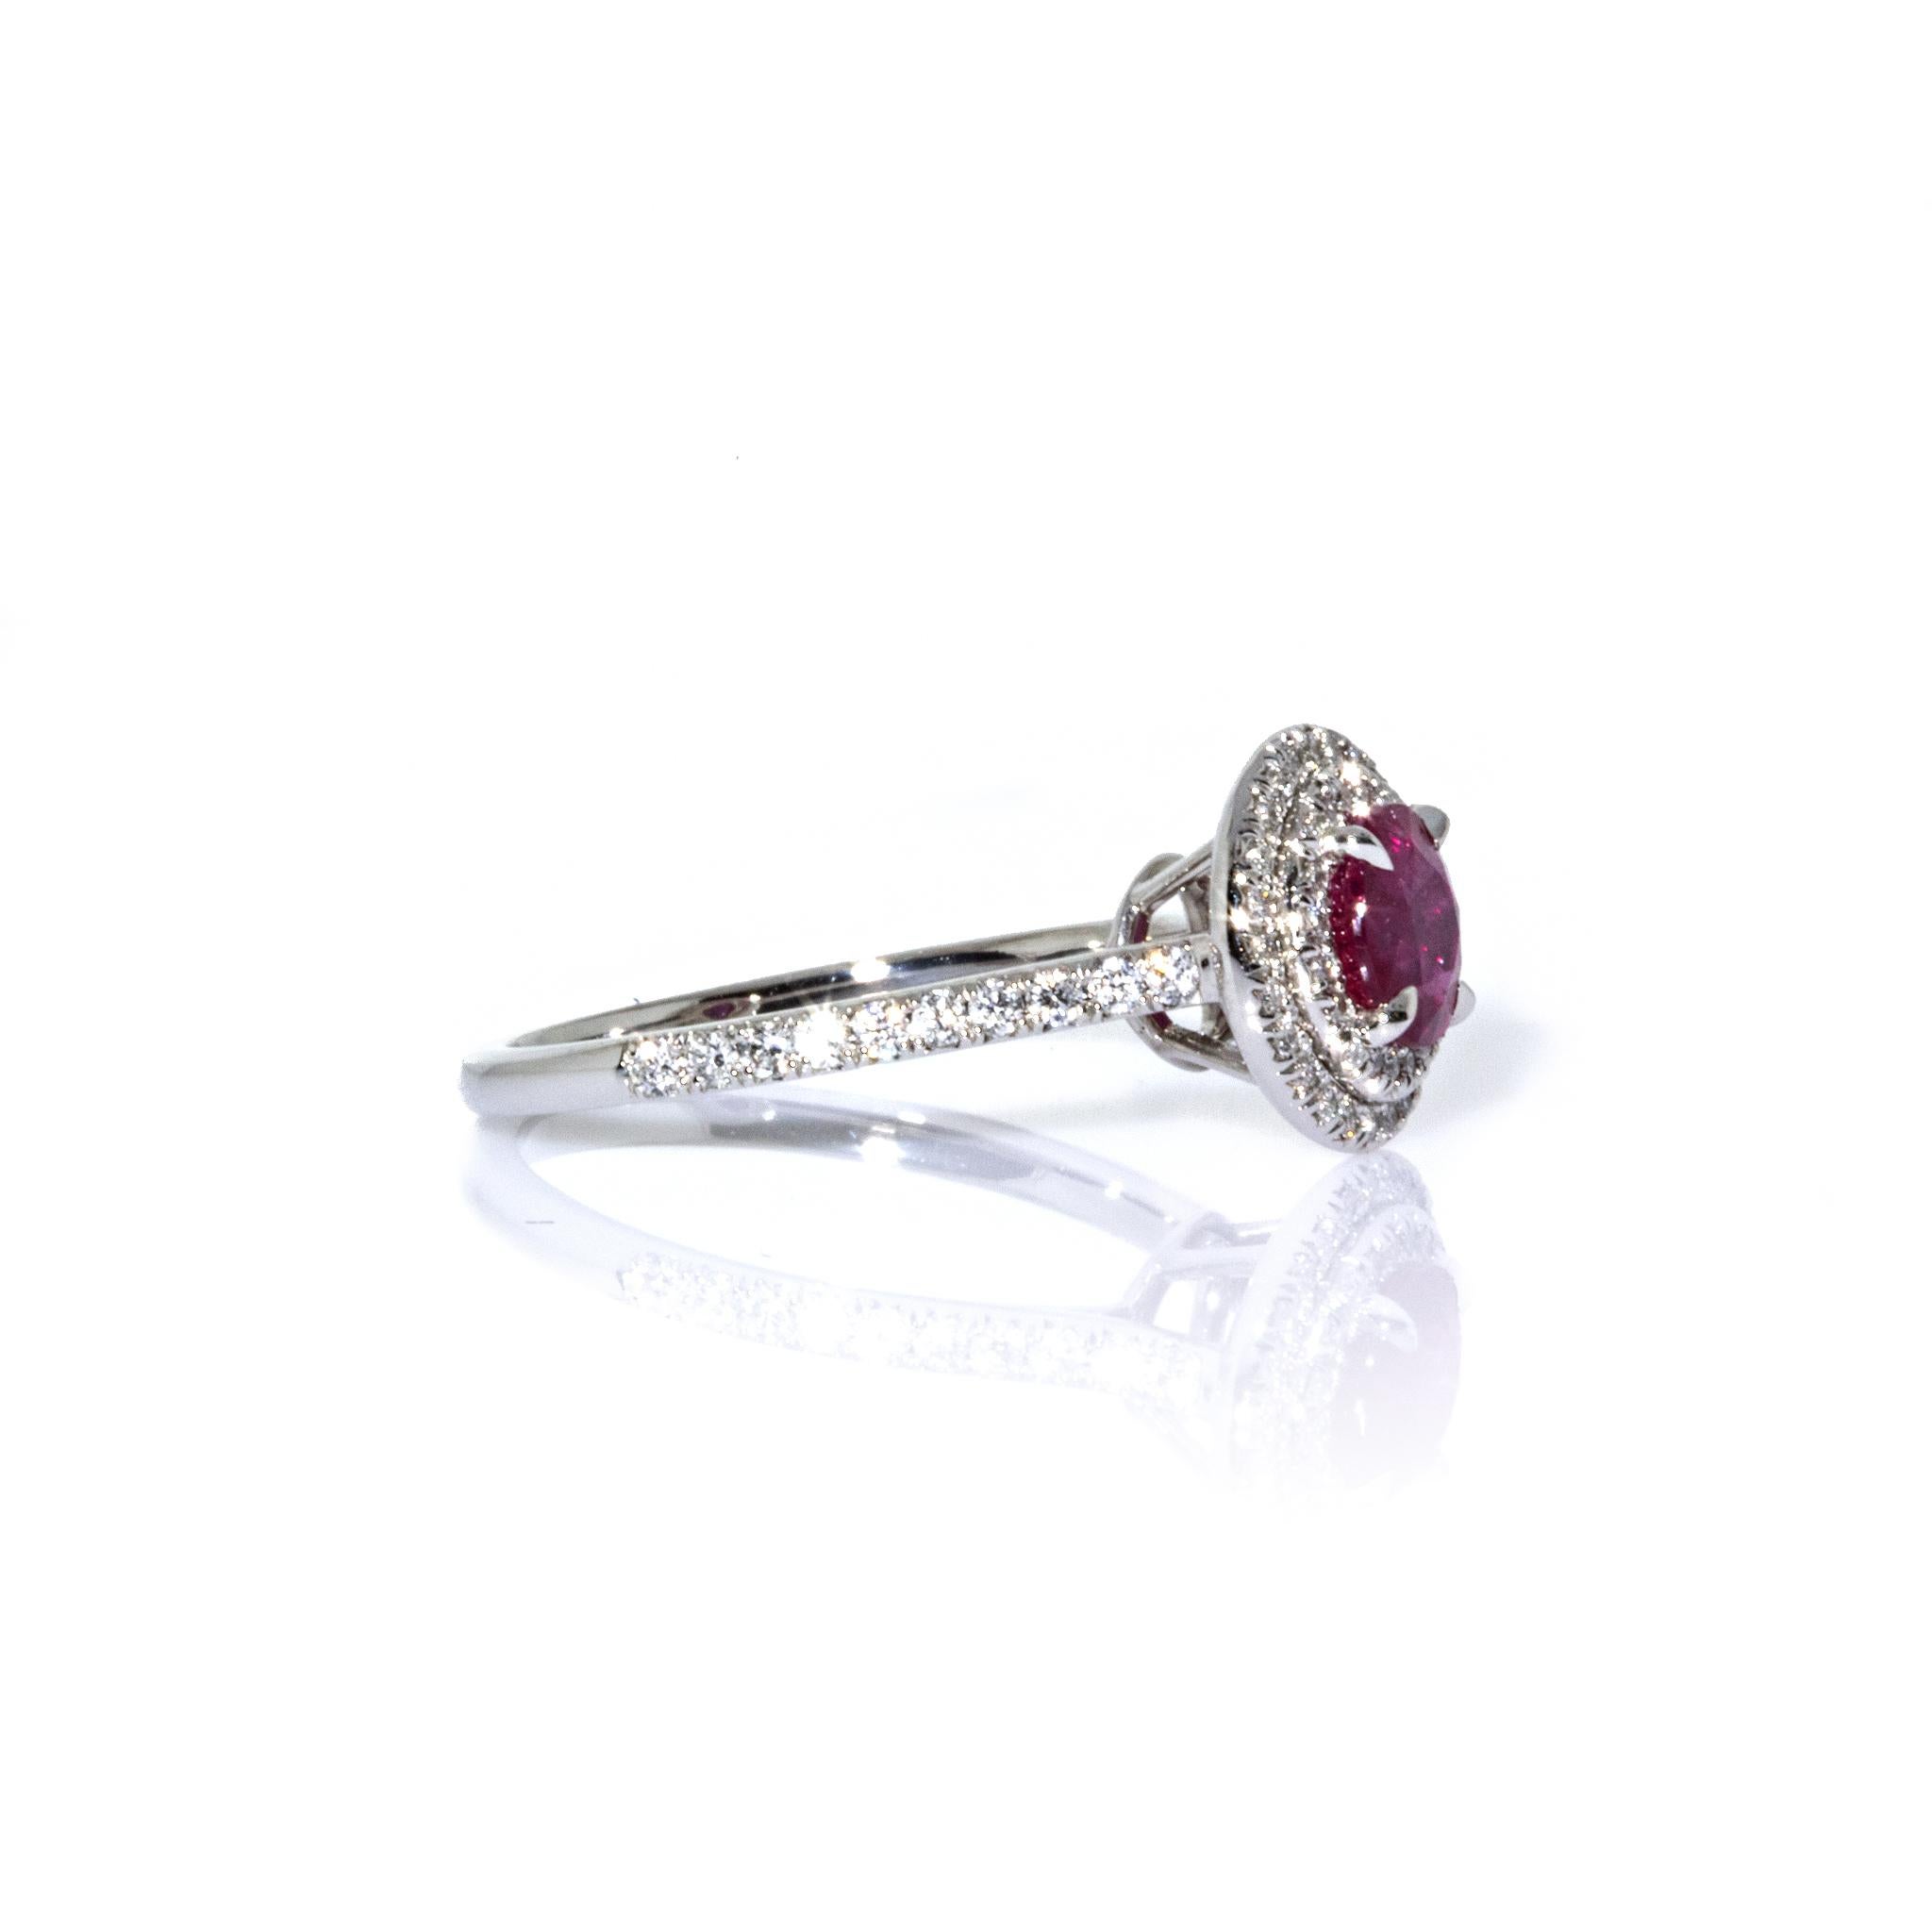 *** Comes with the original Tiffany & Co. Box ***

METAL TYPE: Platinum
STONE WEIGHT: 0.36 ct twd (Diamonds) and 0.50 ct twd (Ruby)
TOTAL WEIGHT: 4.34 g
RING SIZE: 6.5 